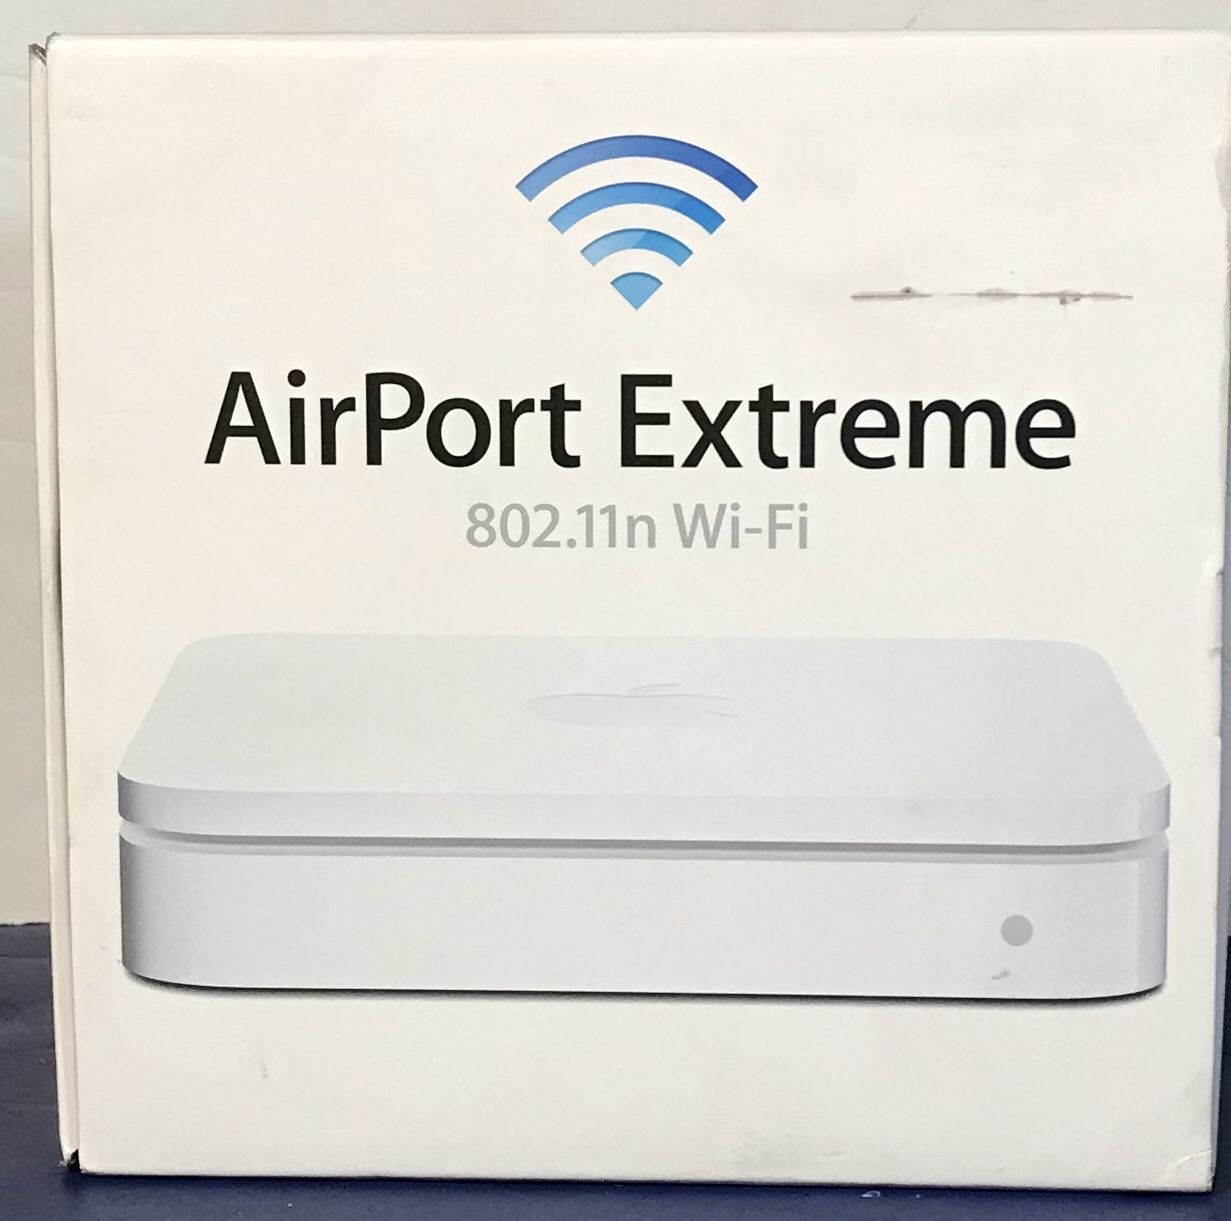 Apple AirPort Extreme 802.11n (5th Gen) Wireless Router Wi-Fi - A1408